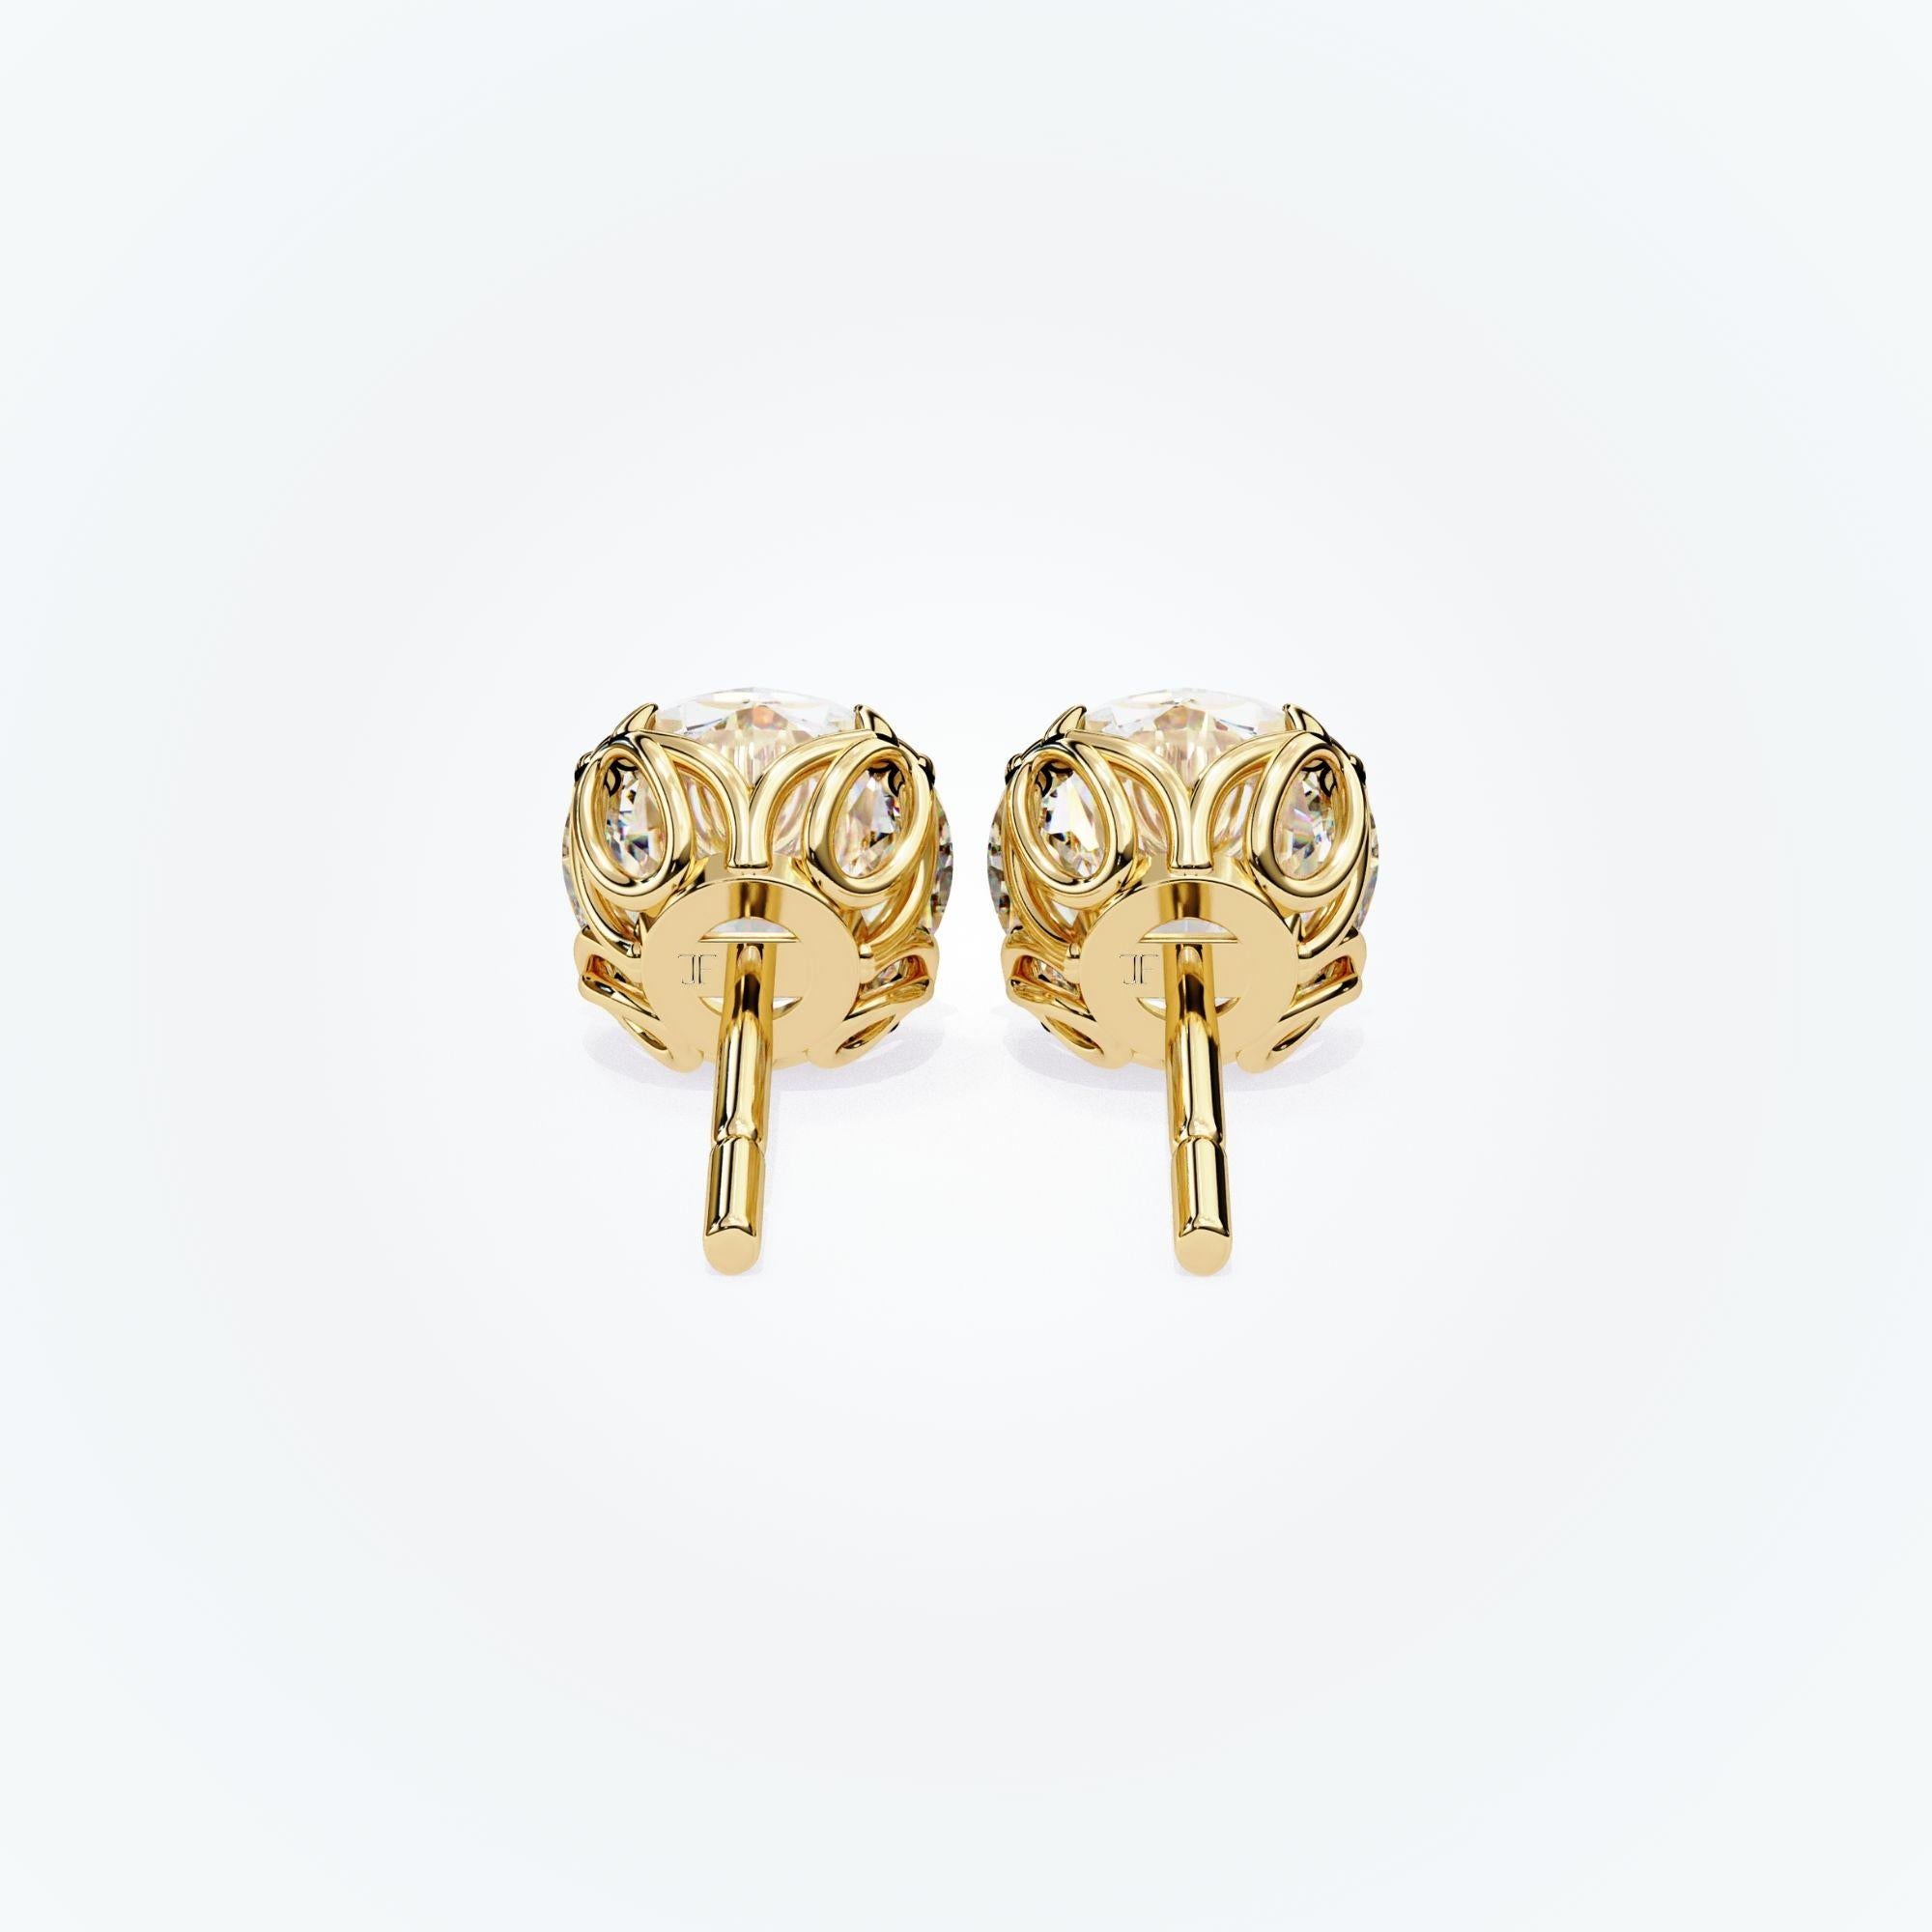 Modern Natural Diamond Studs, Floral, 8 Prongs, 1/2 carat total weight, 14K Solid Gold For Sale